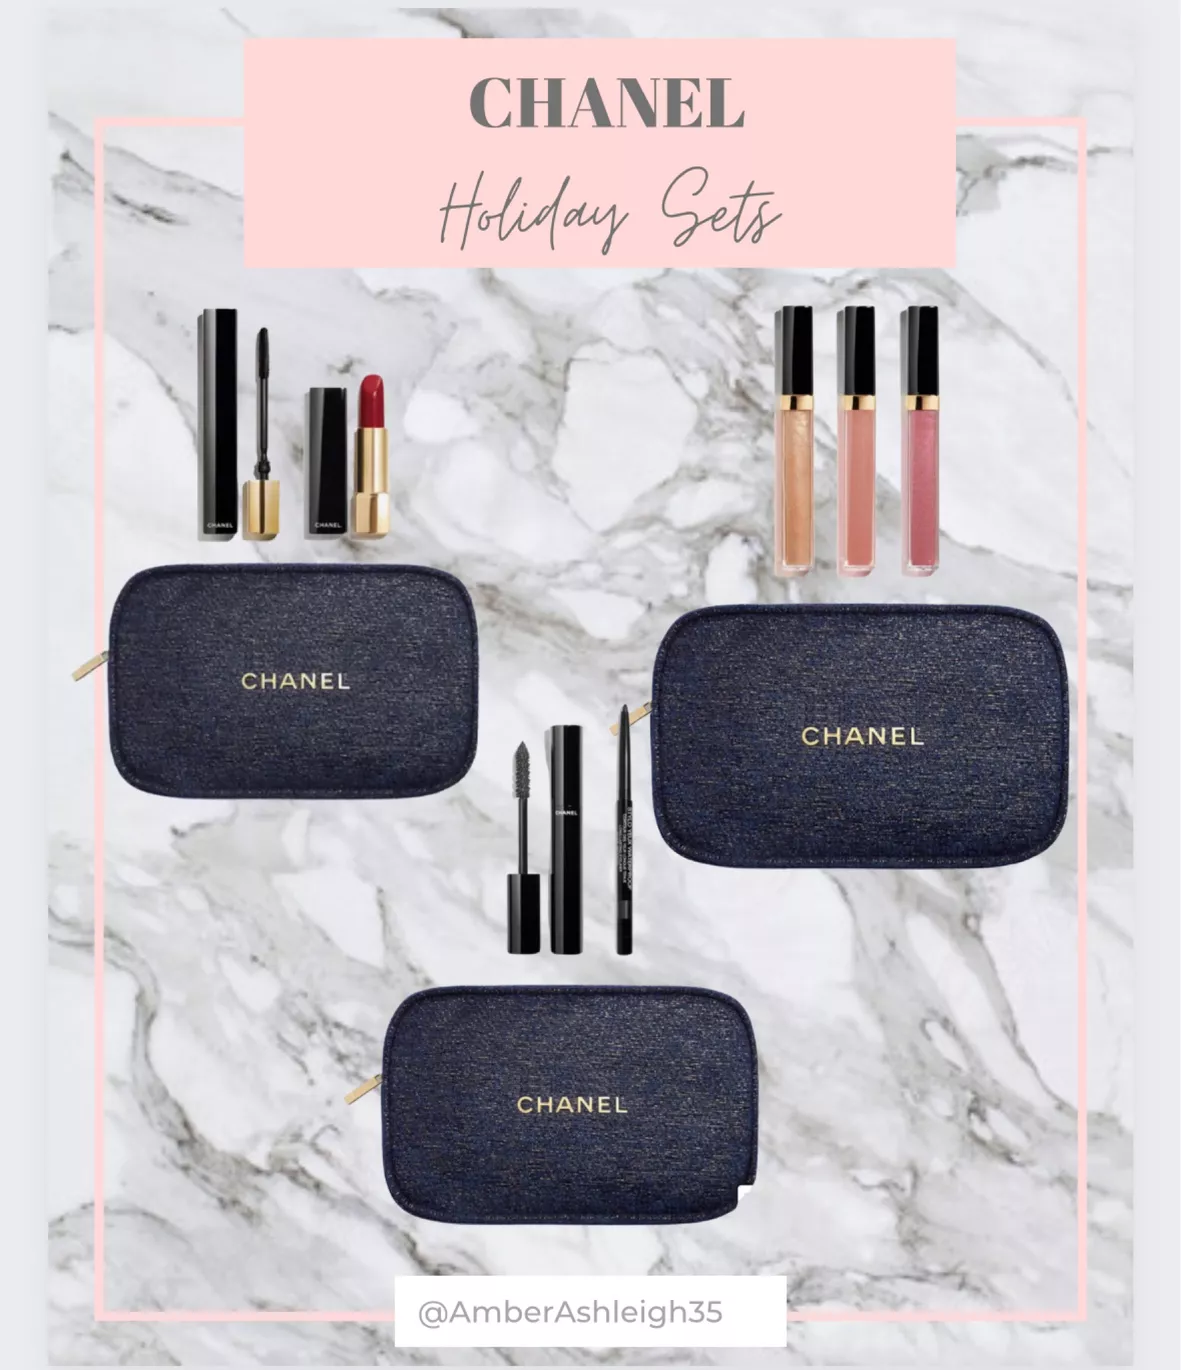 CHANEL, Makeup, New Hydration On Hand Chanel 222 Holiday Beauty Makeup  Gift Set